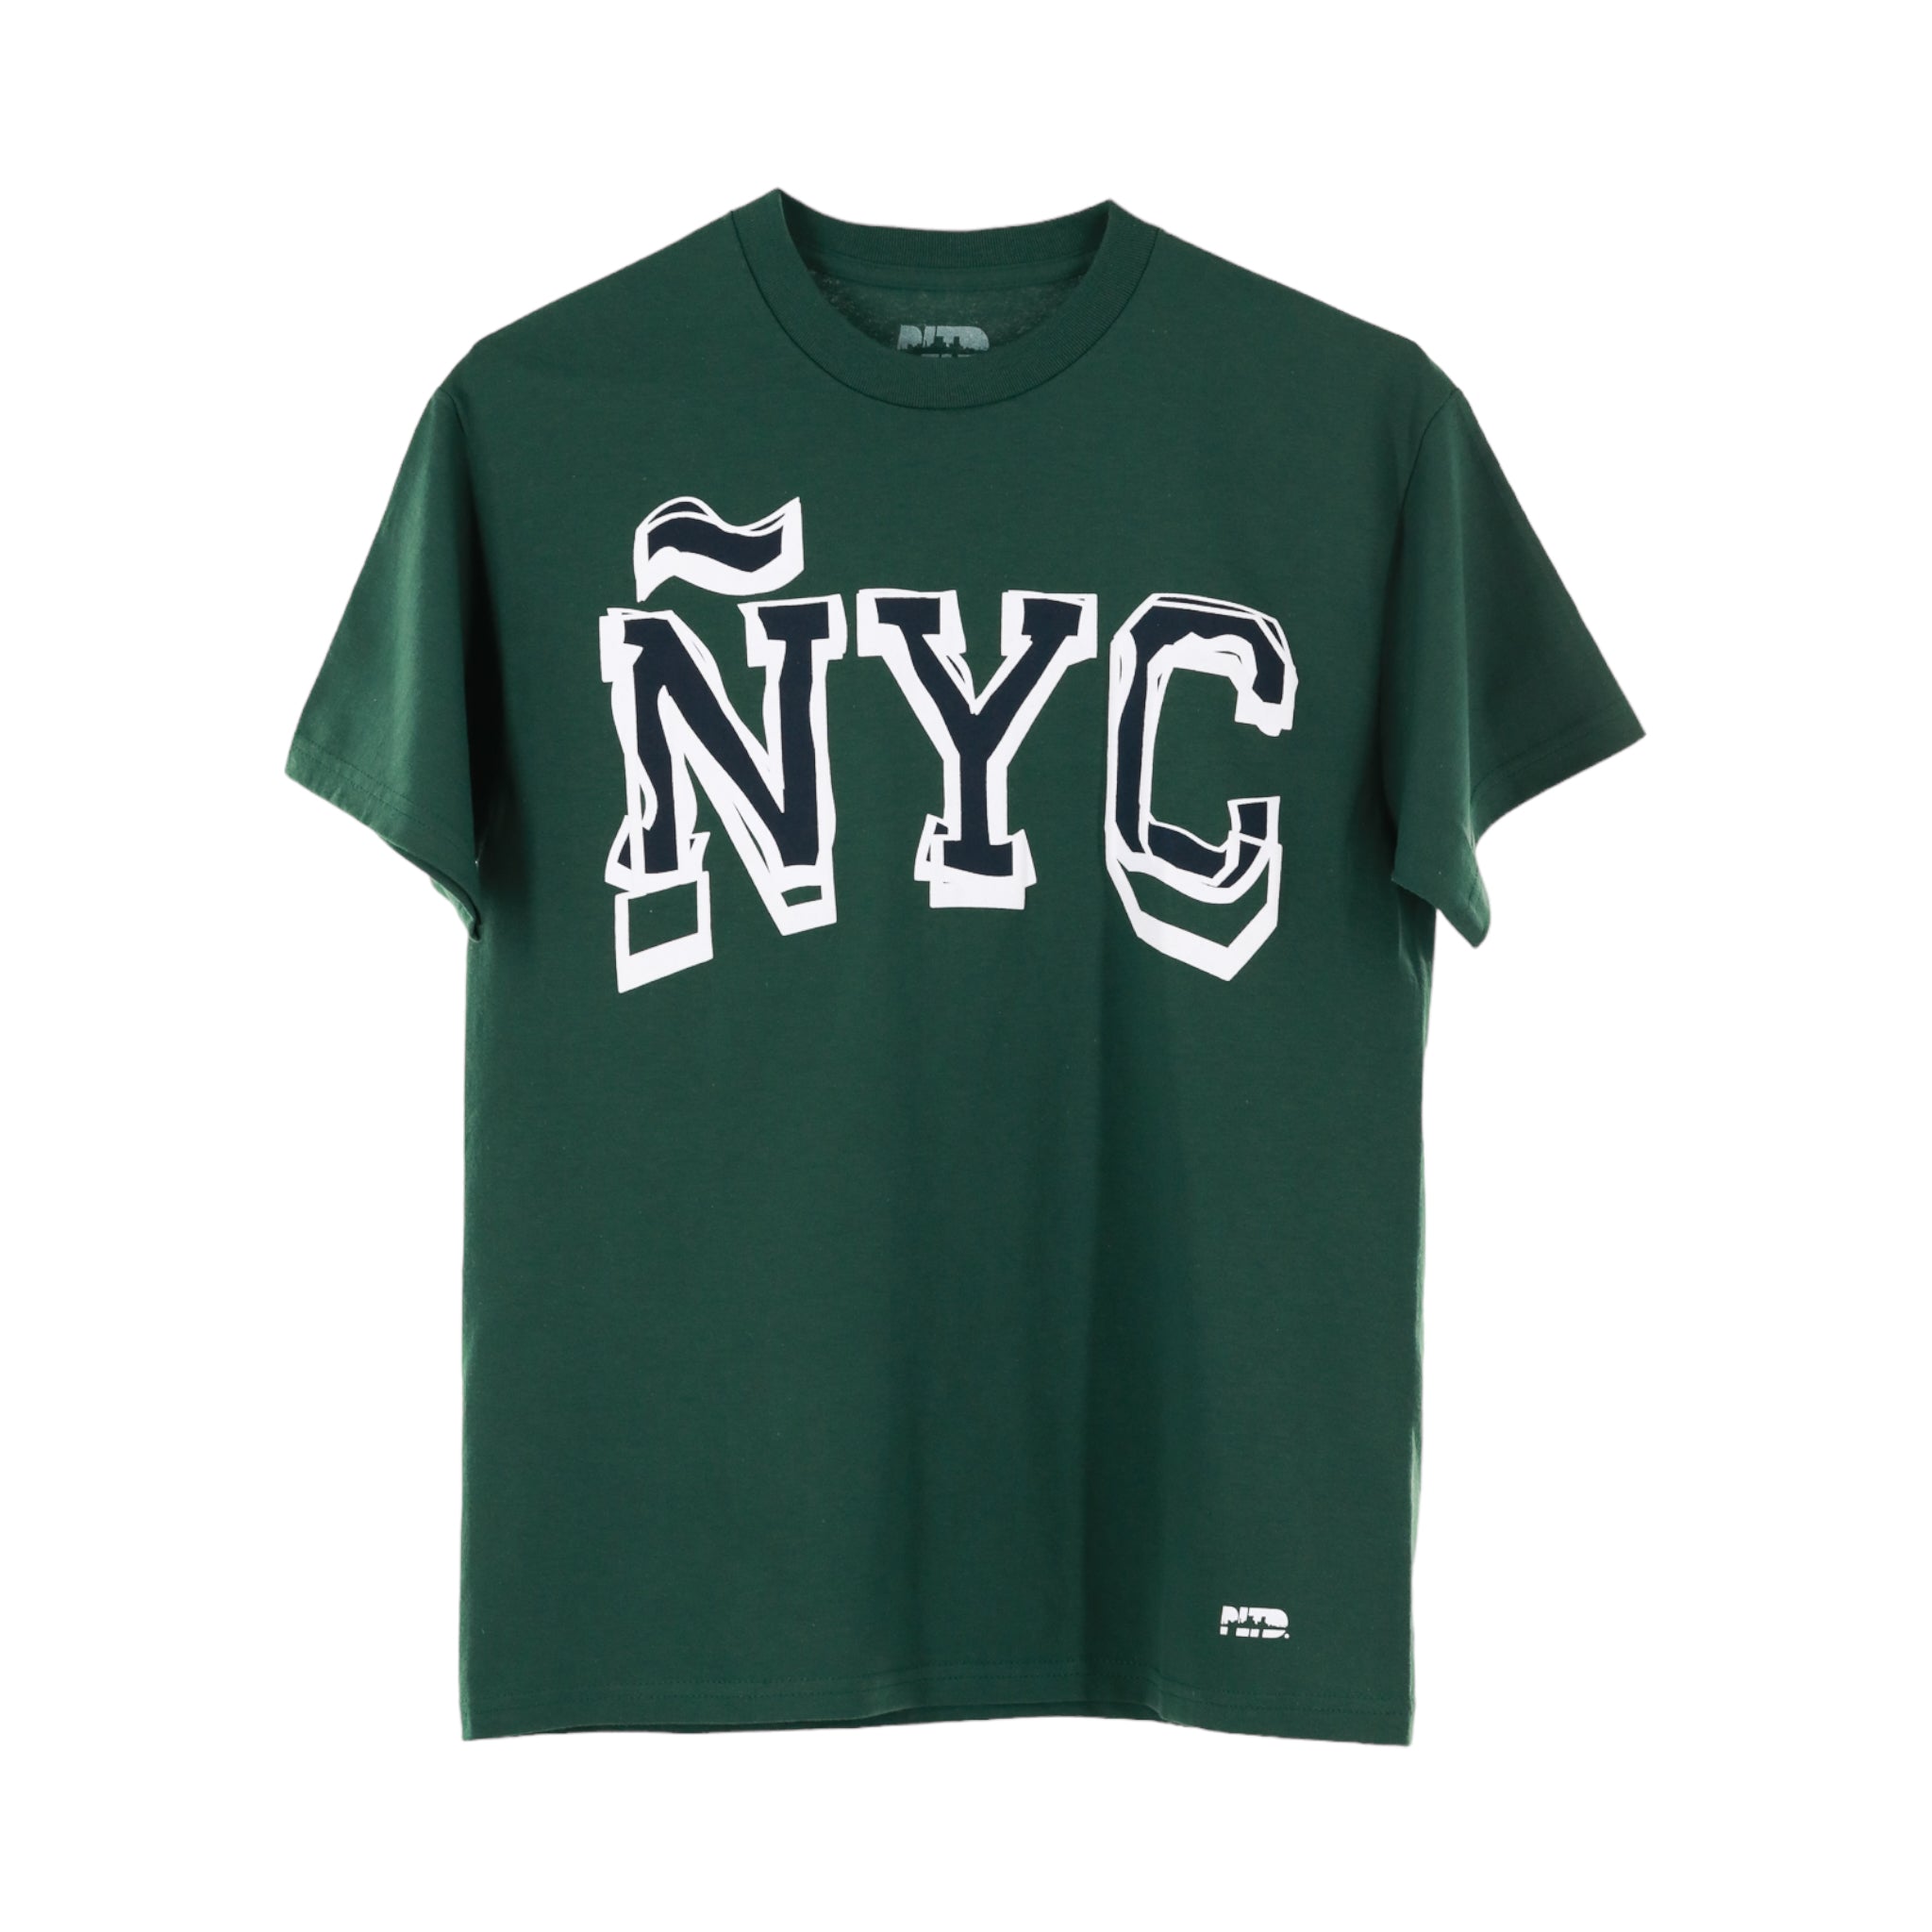 Green square neck t-shirt - River Woods